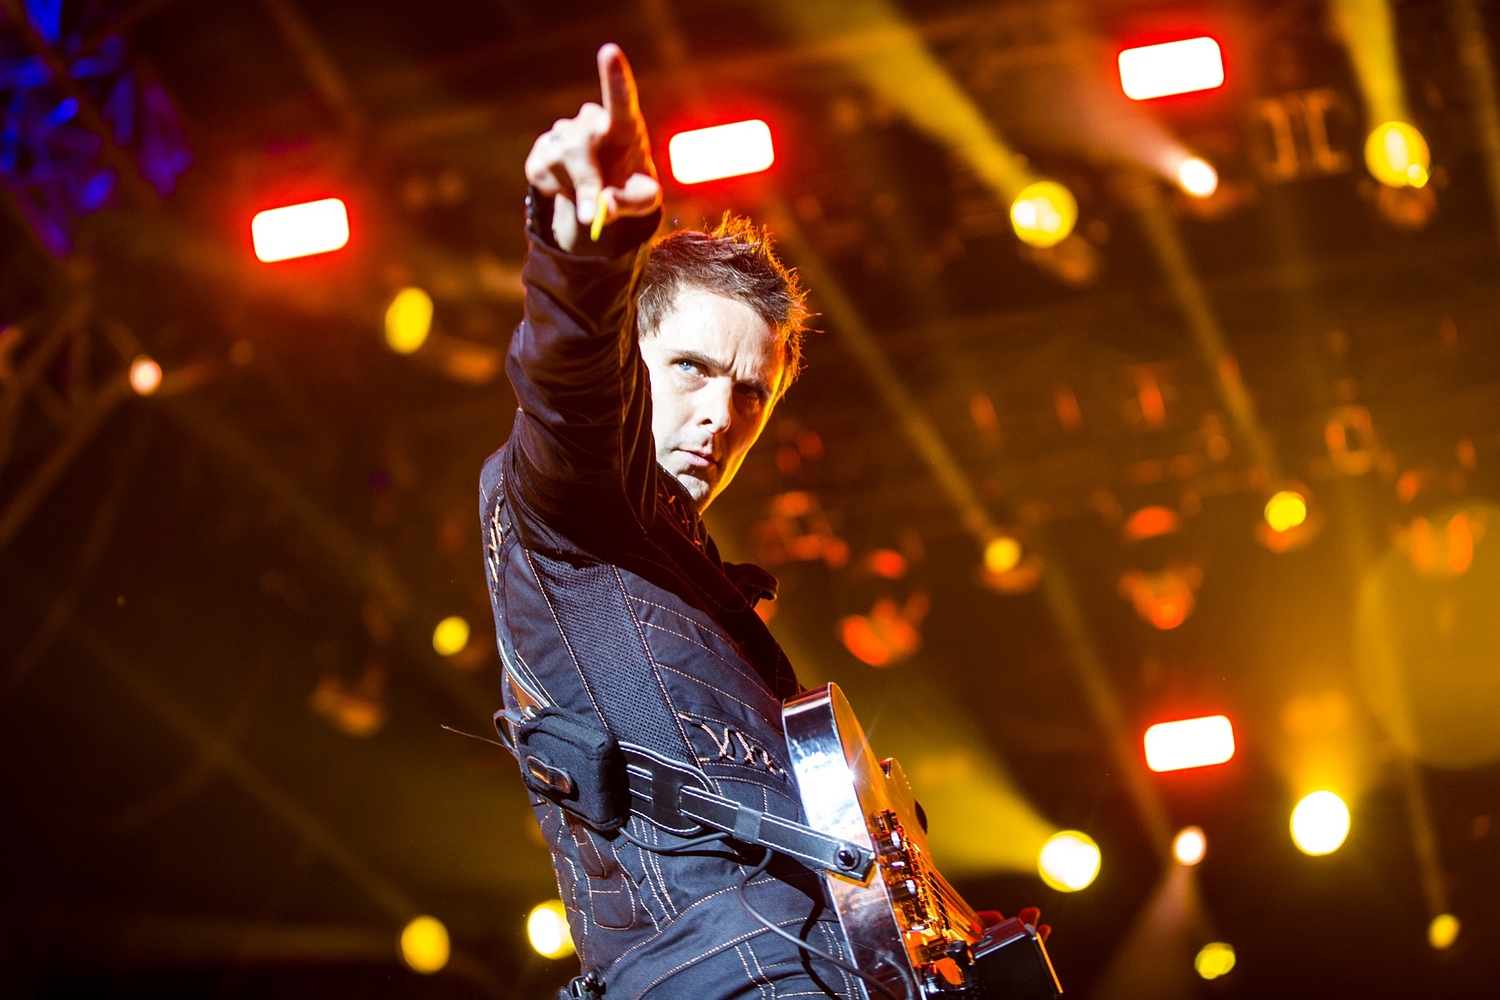 Muse want to learn to fly using magnets, their tour director can’t sleep over it